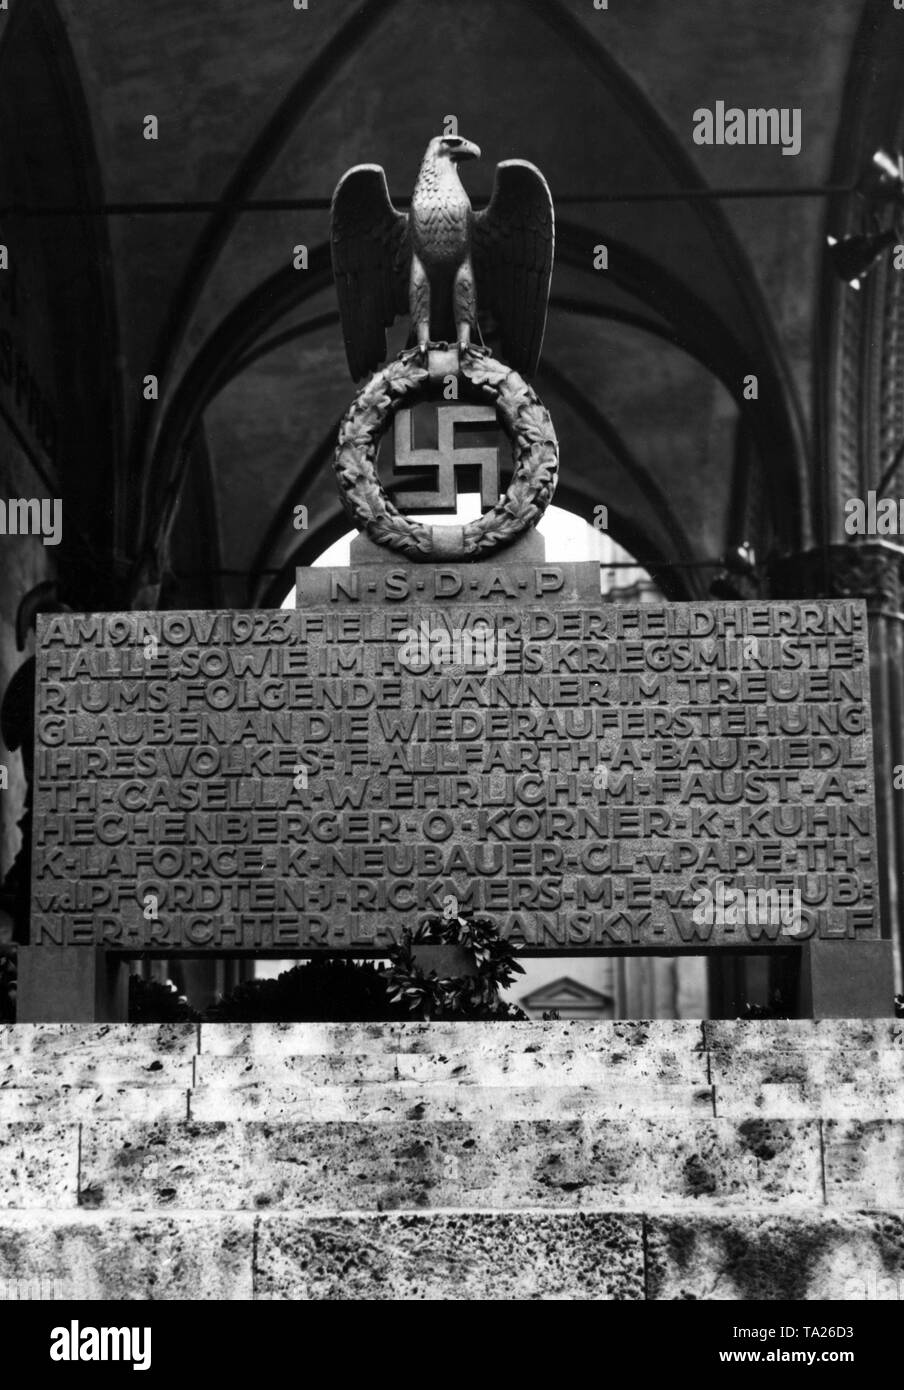 Memorial plaque at the Munich Feldherrnhalle (Odeonsplatz) for the victims of the Beer Hall Putsch in 1923. It reads: 'On the 9th of November, 1923 the following men fell having true faith in the resurgence of their people in front of the Feldherrnhalle, as well as in the court of the Ministry of War: F. Allfarth, A. Bauriedl, Th. Casella, W. Ehrlich, M. Faust, A. Hechenberger, O. Koerner, K. Kuhn, K. Laforce, K. Neubauer, Cl. v. Pape, Th. v. d. Pfordten, J. Rickmers, M. E. v. Scheubner-Richter, L. v. Stransky, W. Wolf.'  Foto: Heinrich Hoffmann Stock Photo